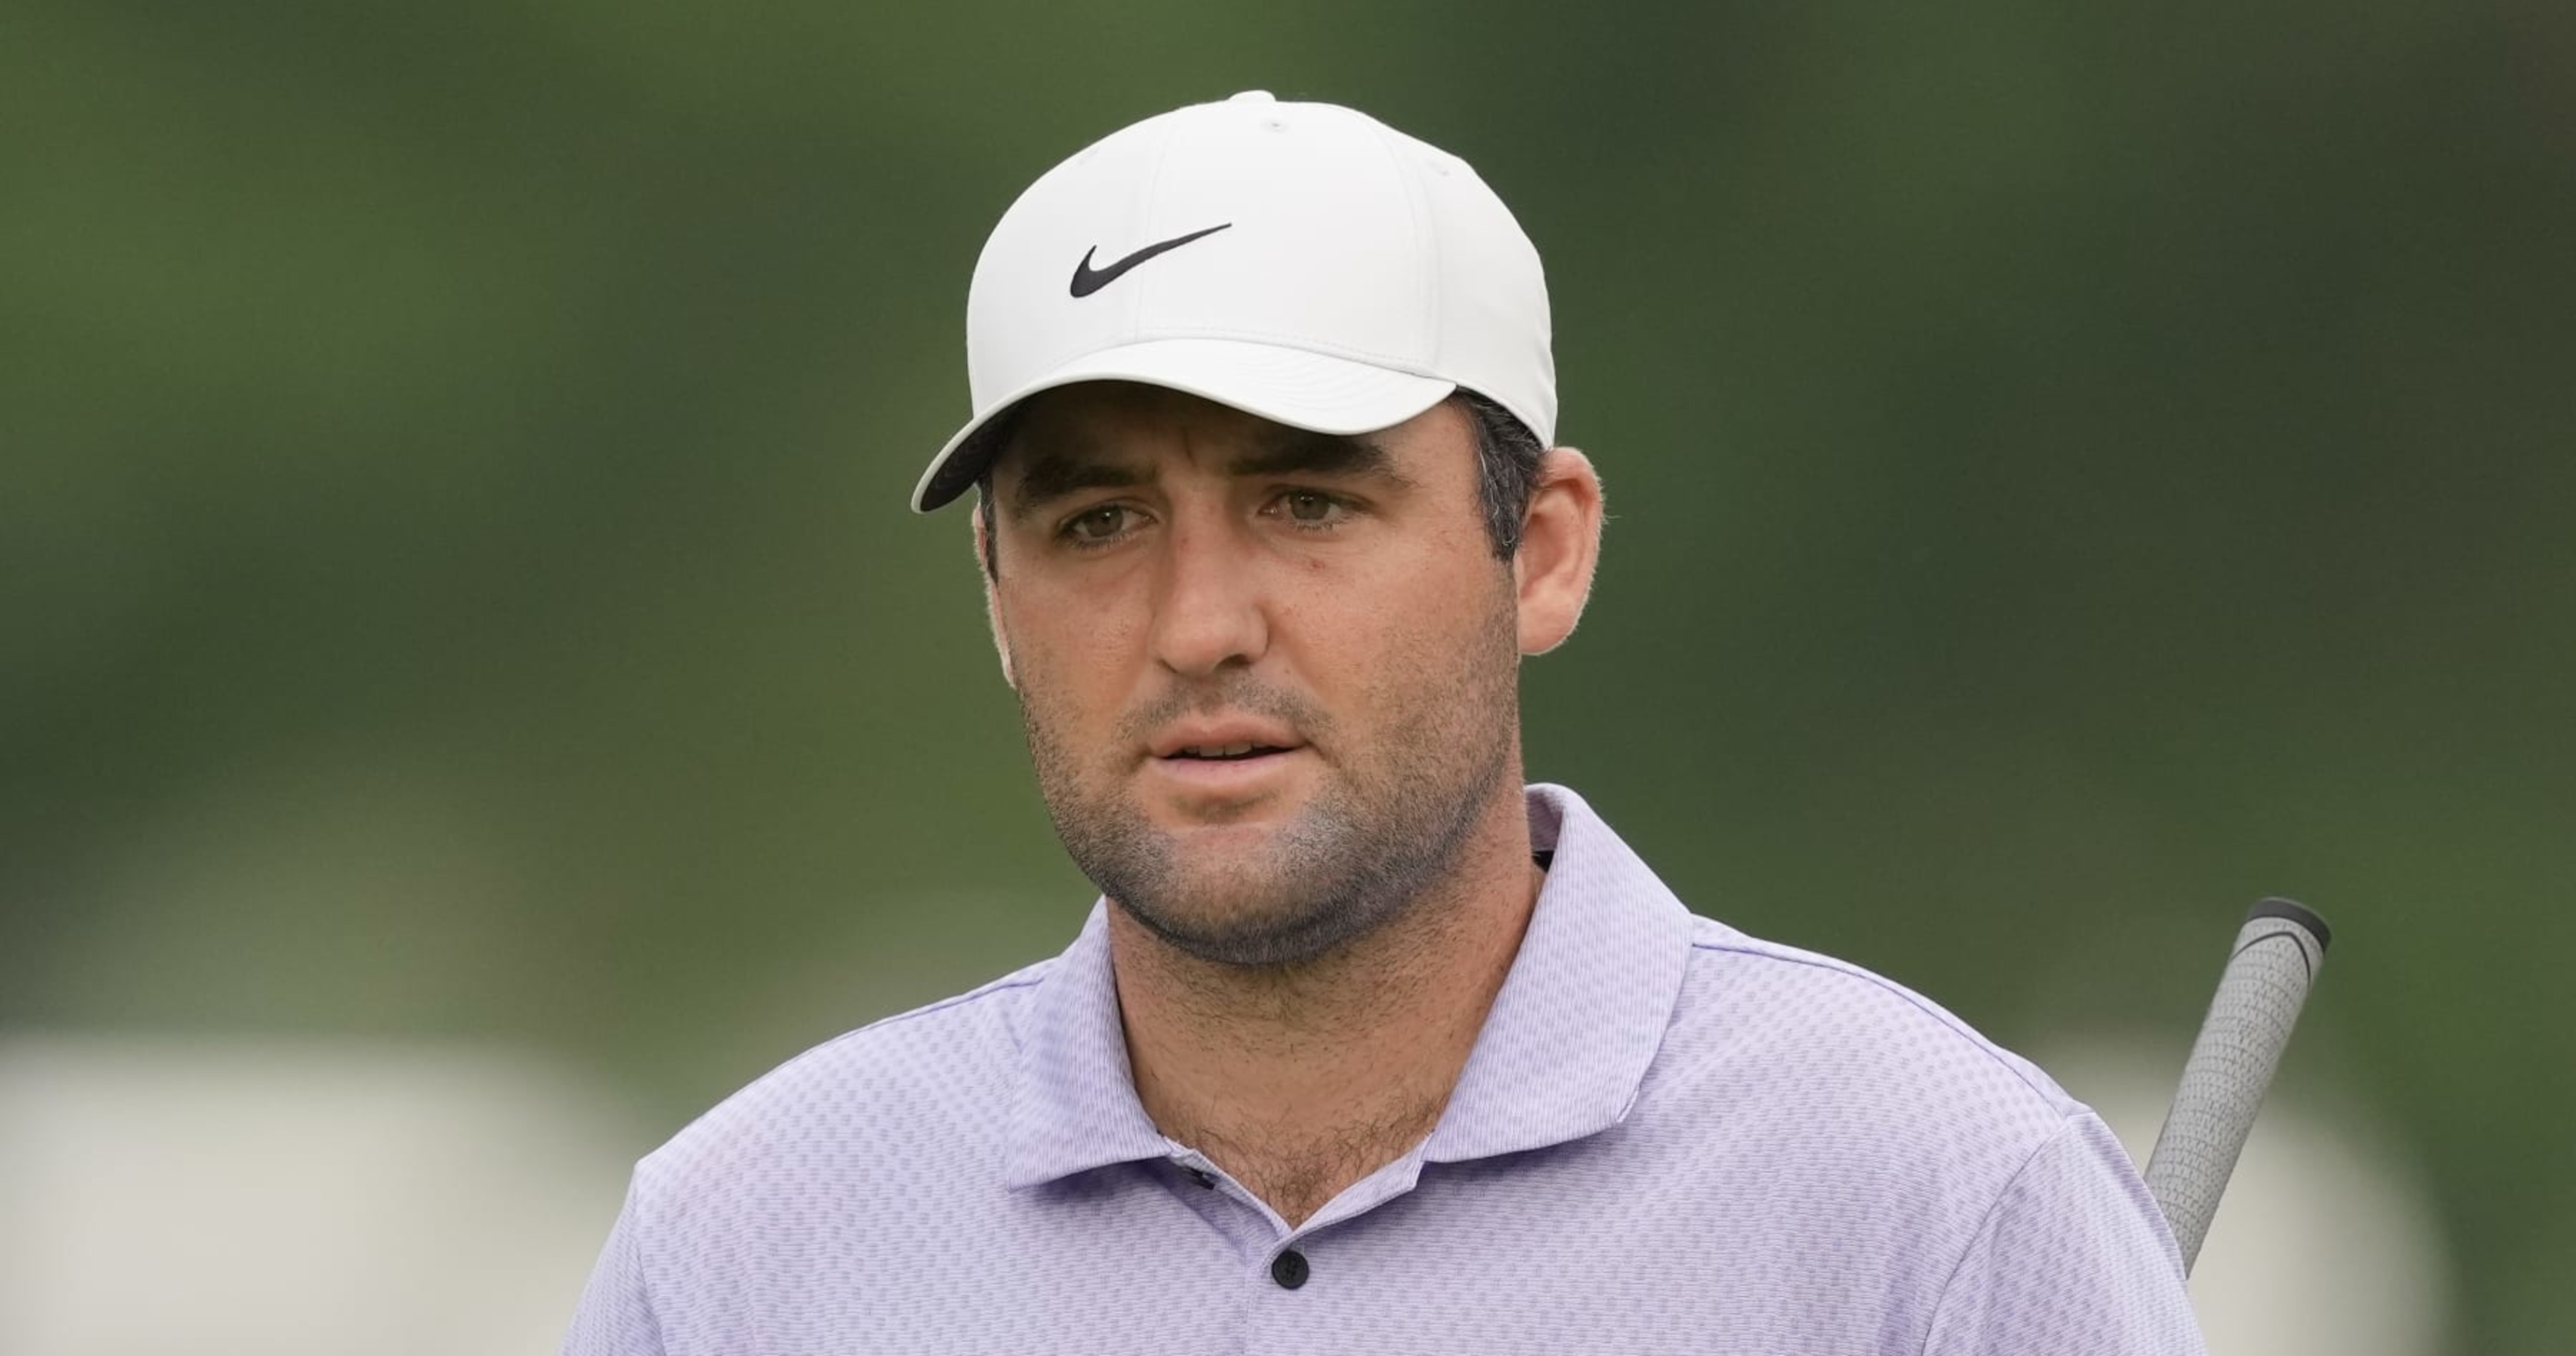 Scottie Scheffler's Charges from PGA Championship Arrest Dropped by Prosecutor